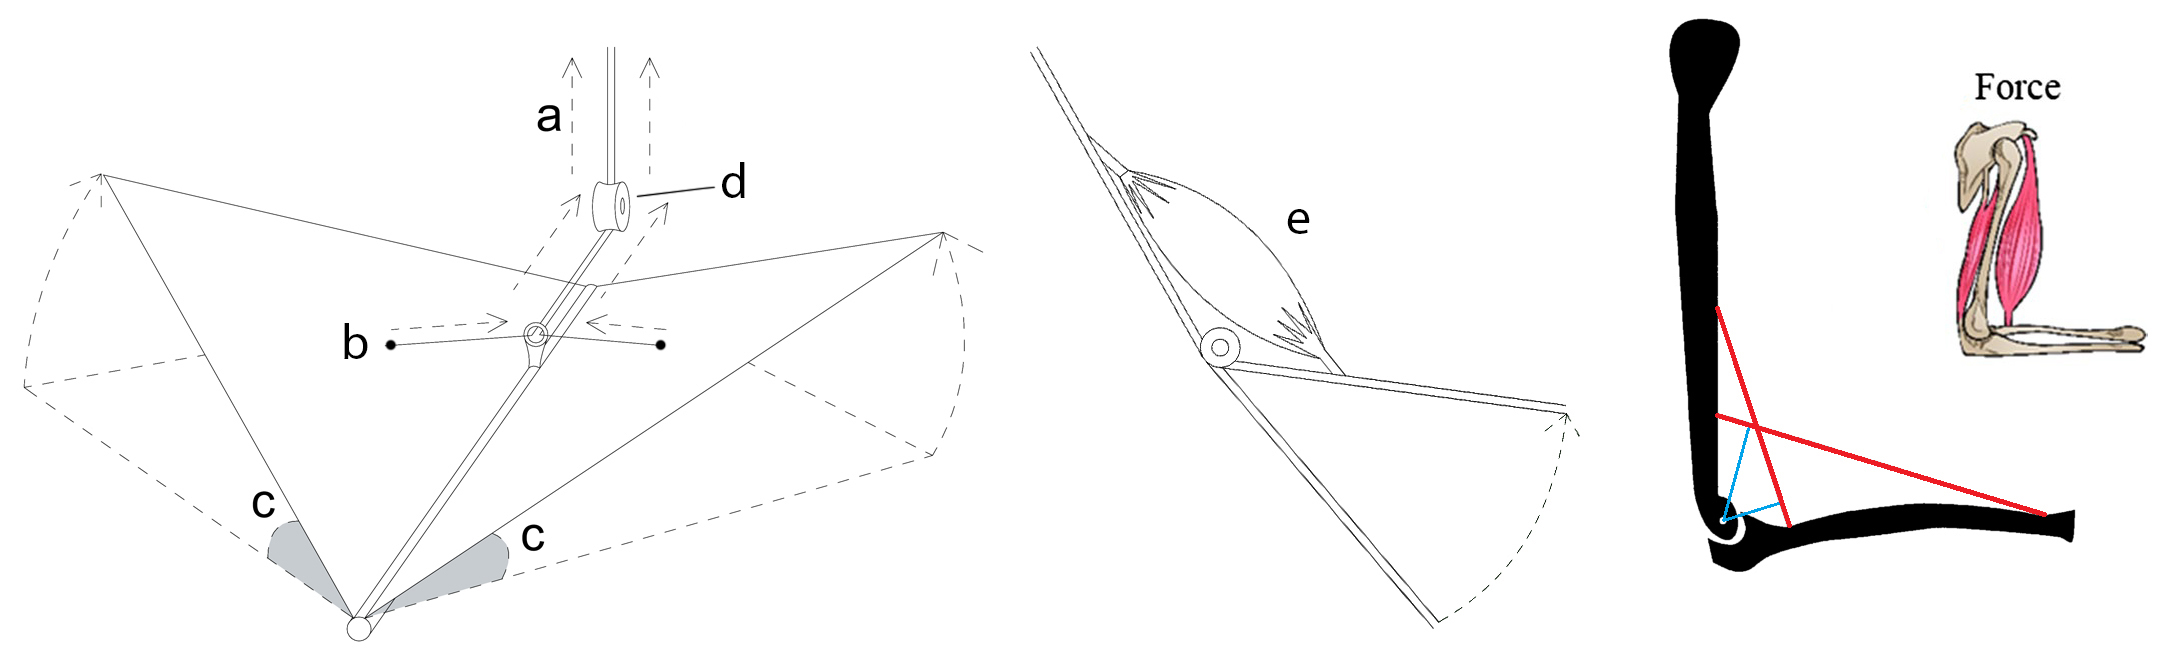 Mimicking the hand movement to control the module movement. a: string connected to actuator, b: string end attached to plate, c: angle change of plates, e: mimicked muscle.